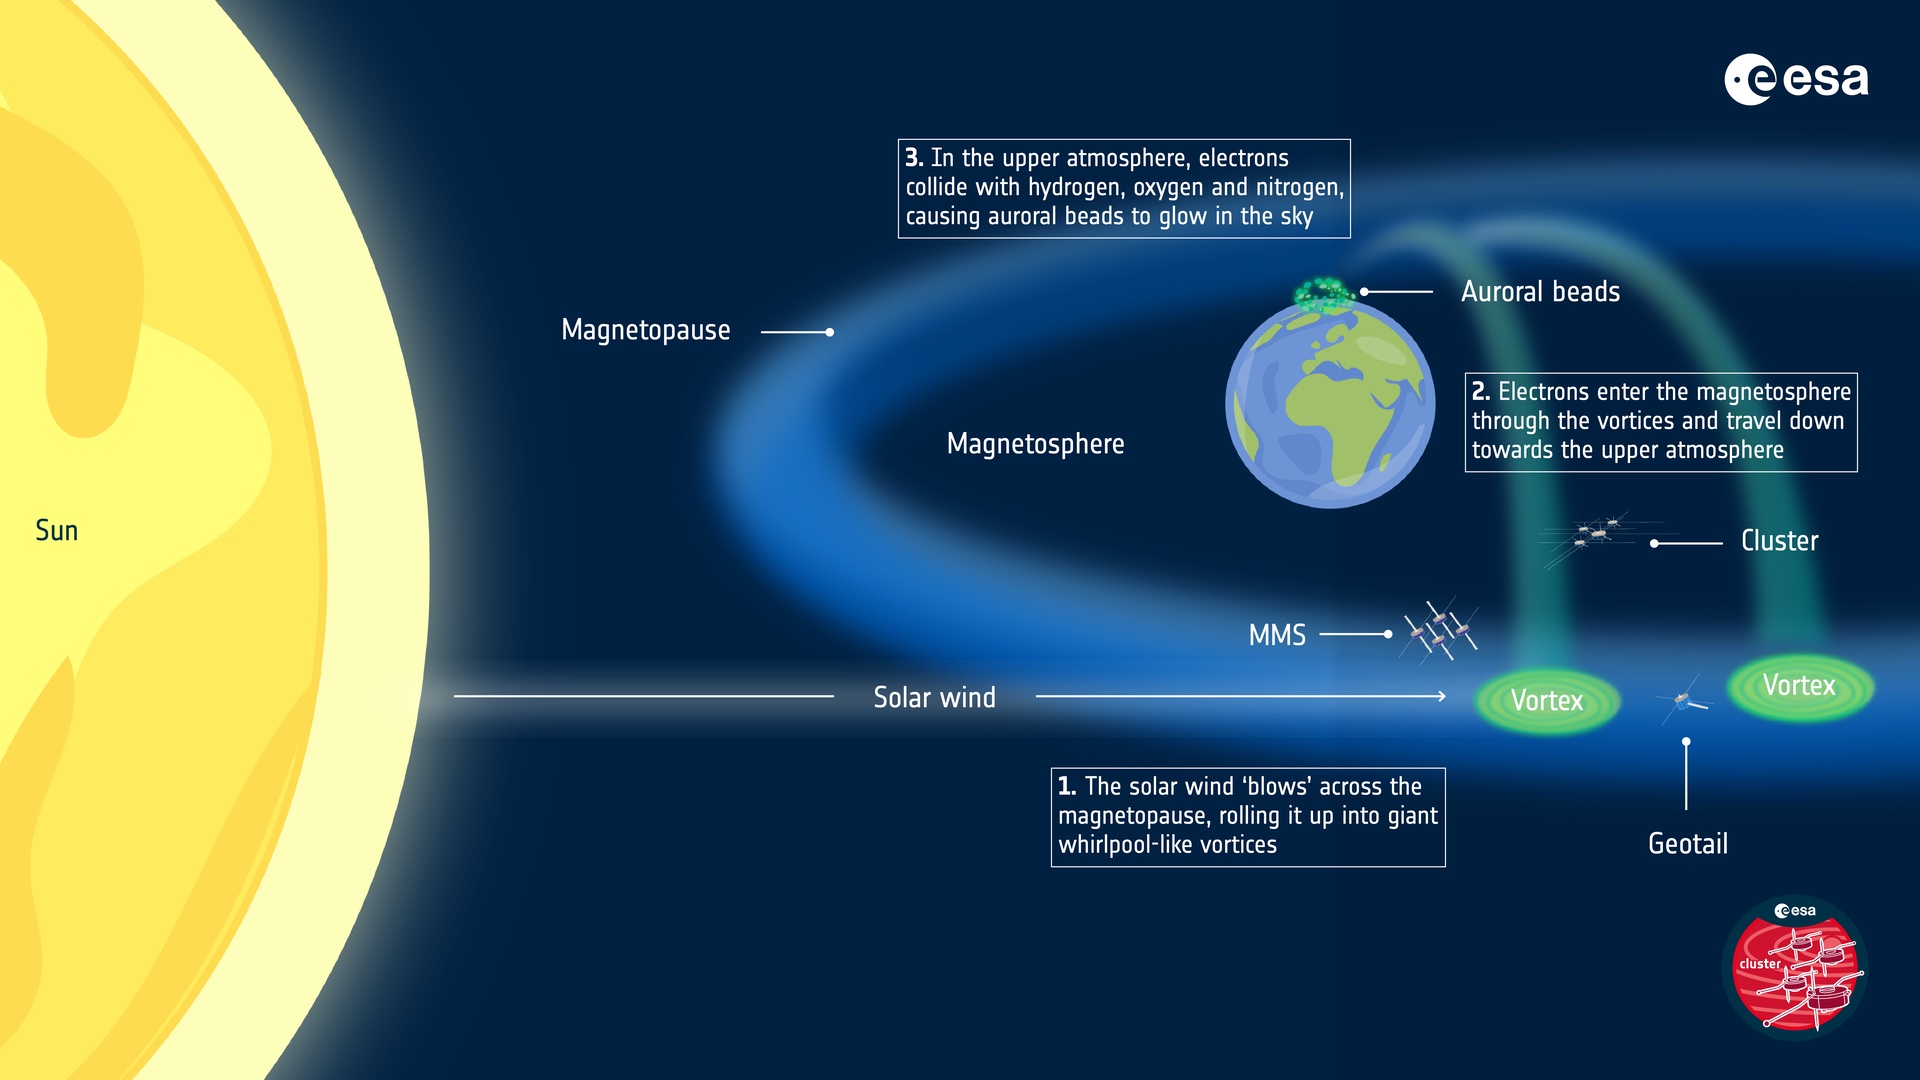 Electrons from solar wind enter Earth's magnetosphere through vortices and travel down toward the upper atmosphere, where they collide with hydrogen, oxygen and nitrogen, and create glowing auroral beads.